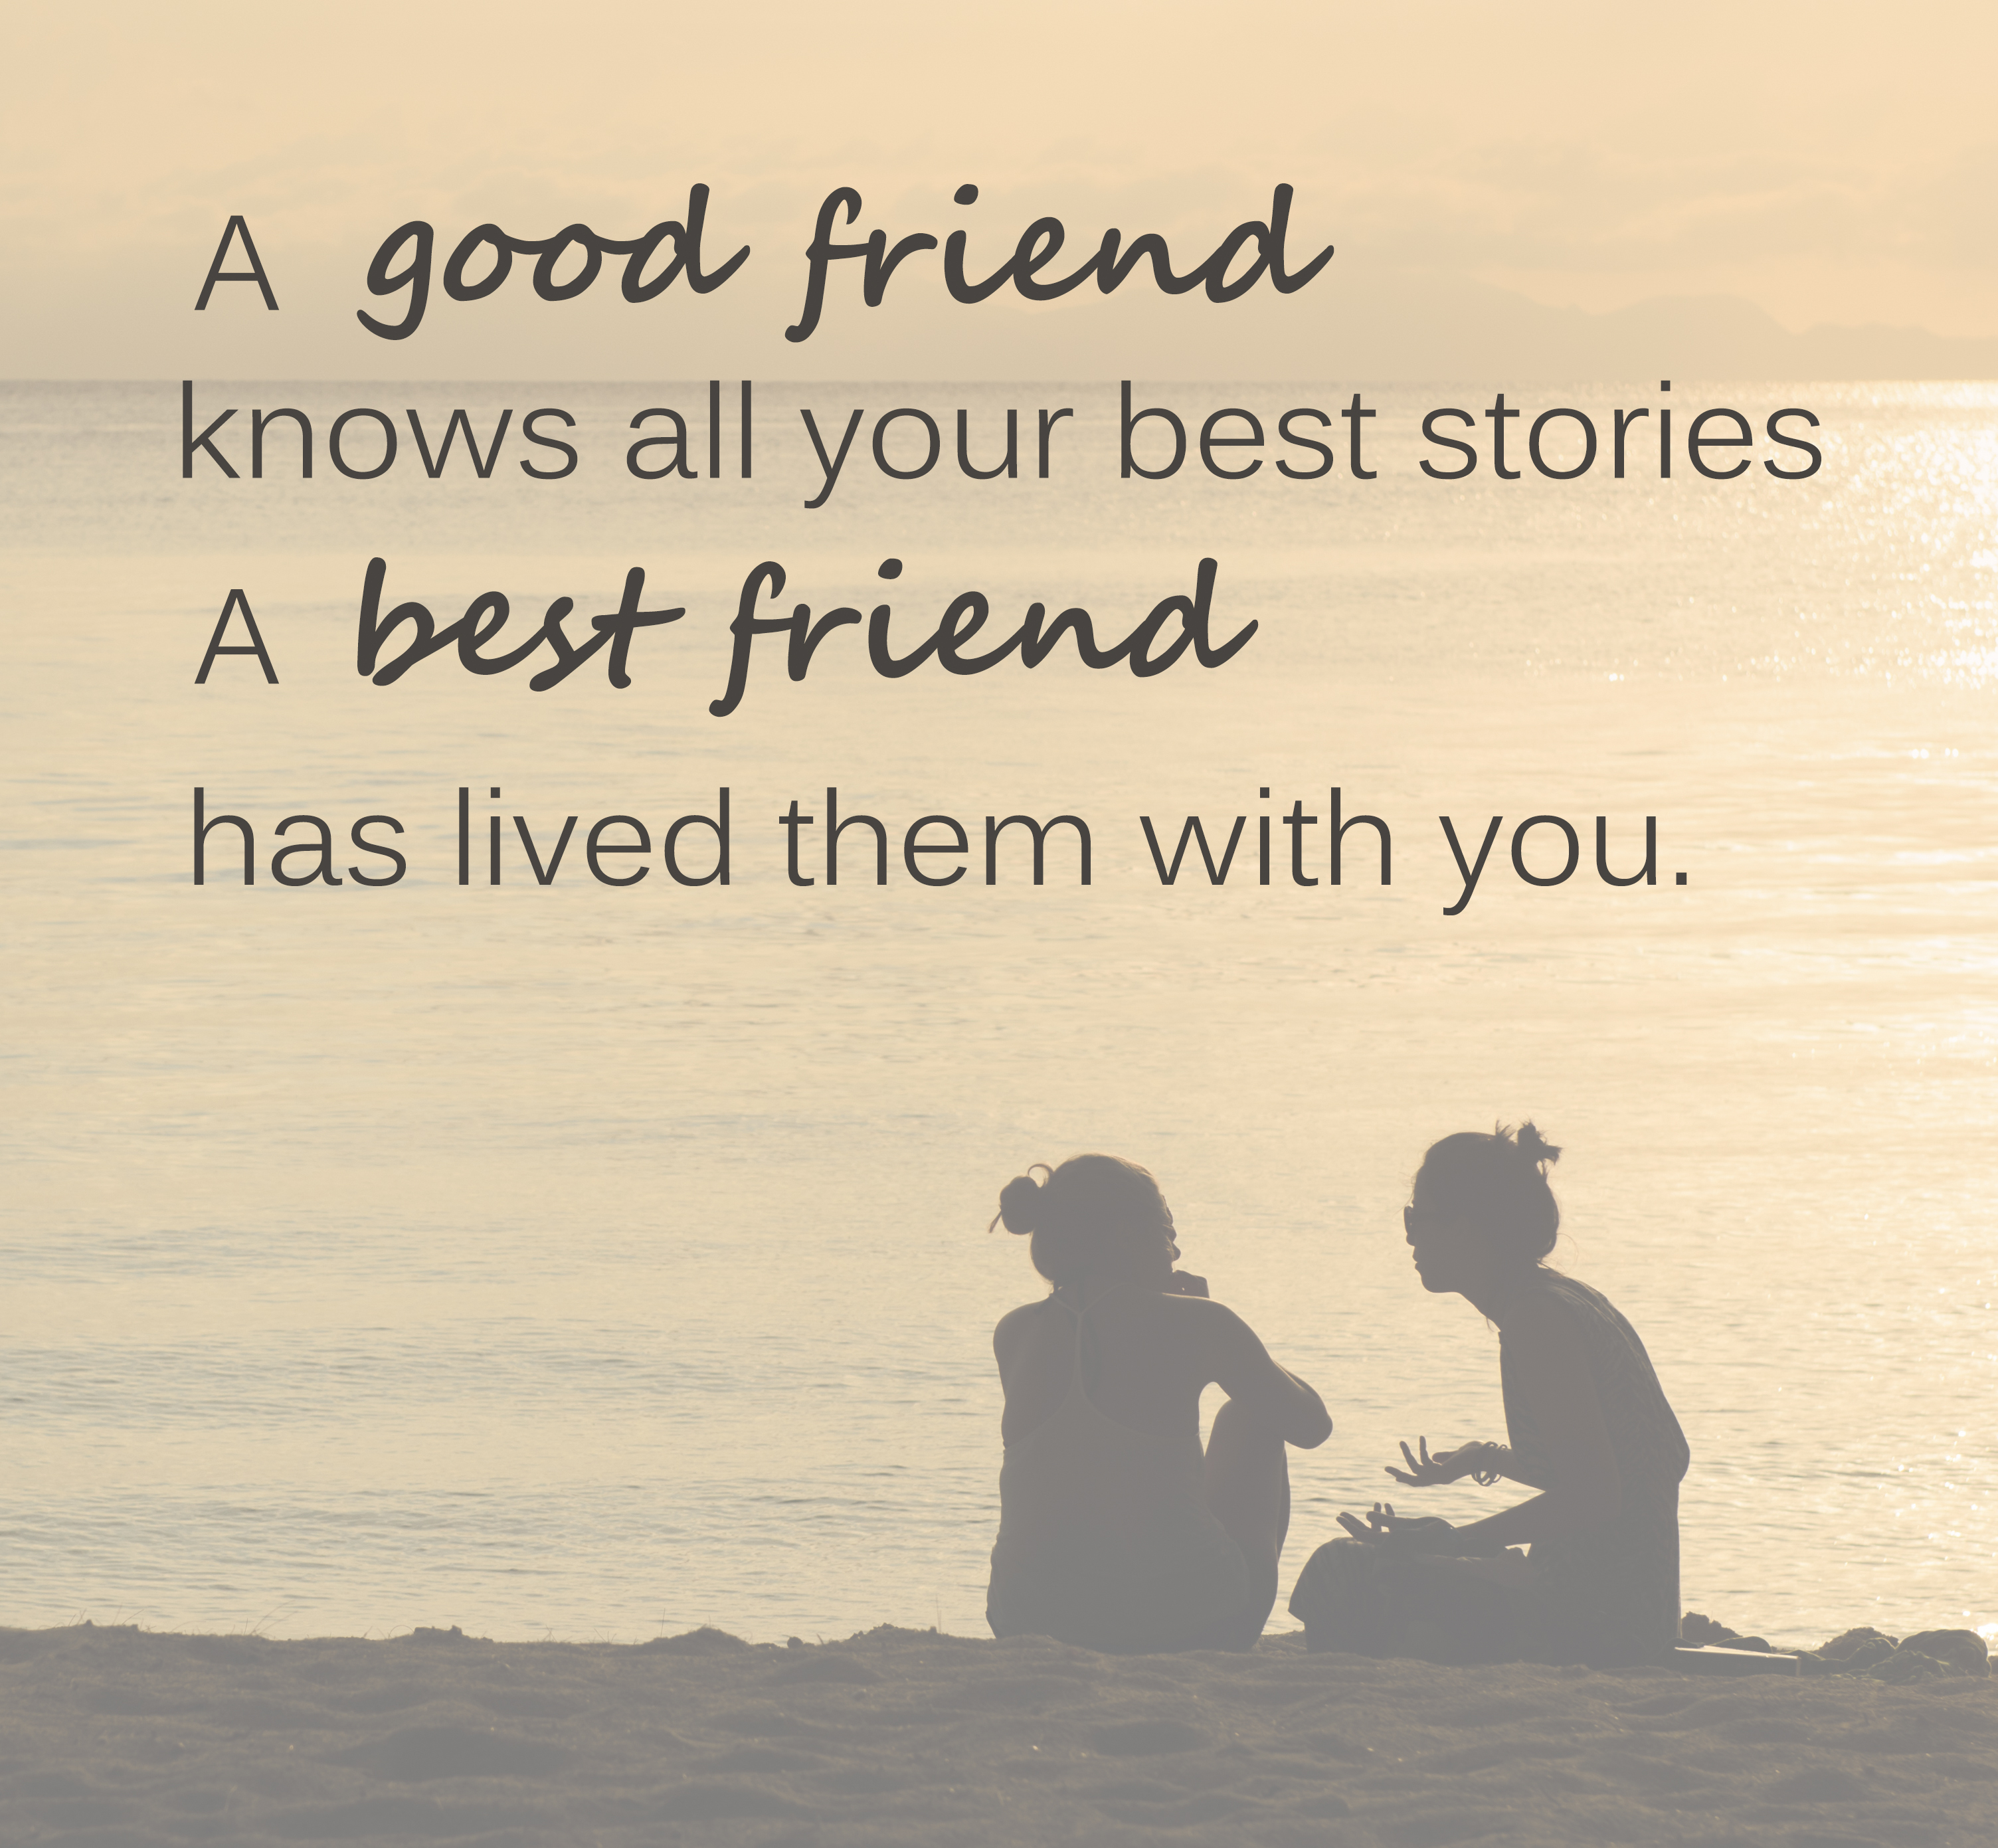 Happy National Best Friend Day 2022: Wishes, Image, Status, Quotes, Messages and WhatsApp Greetings to Share